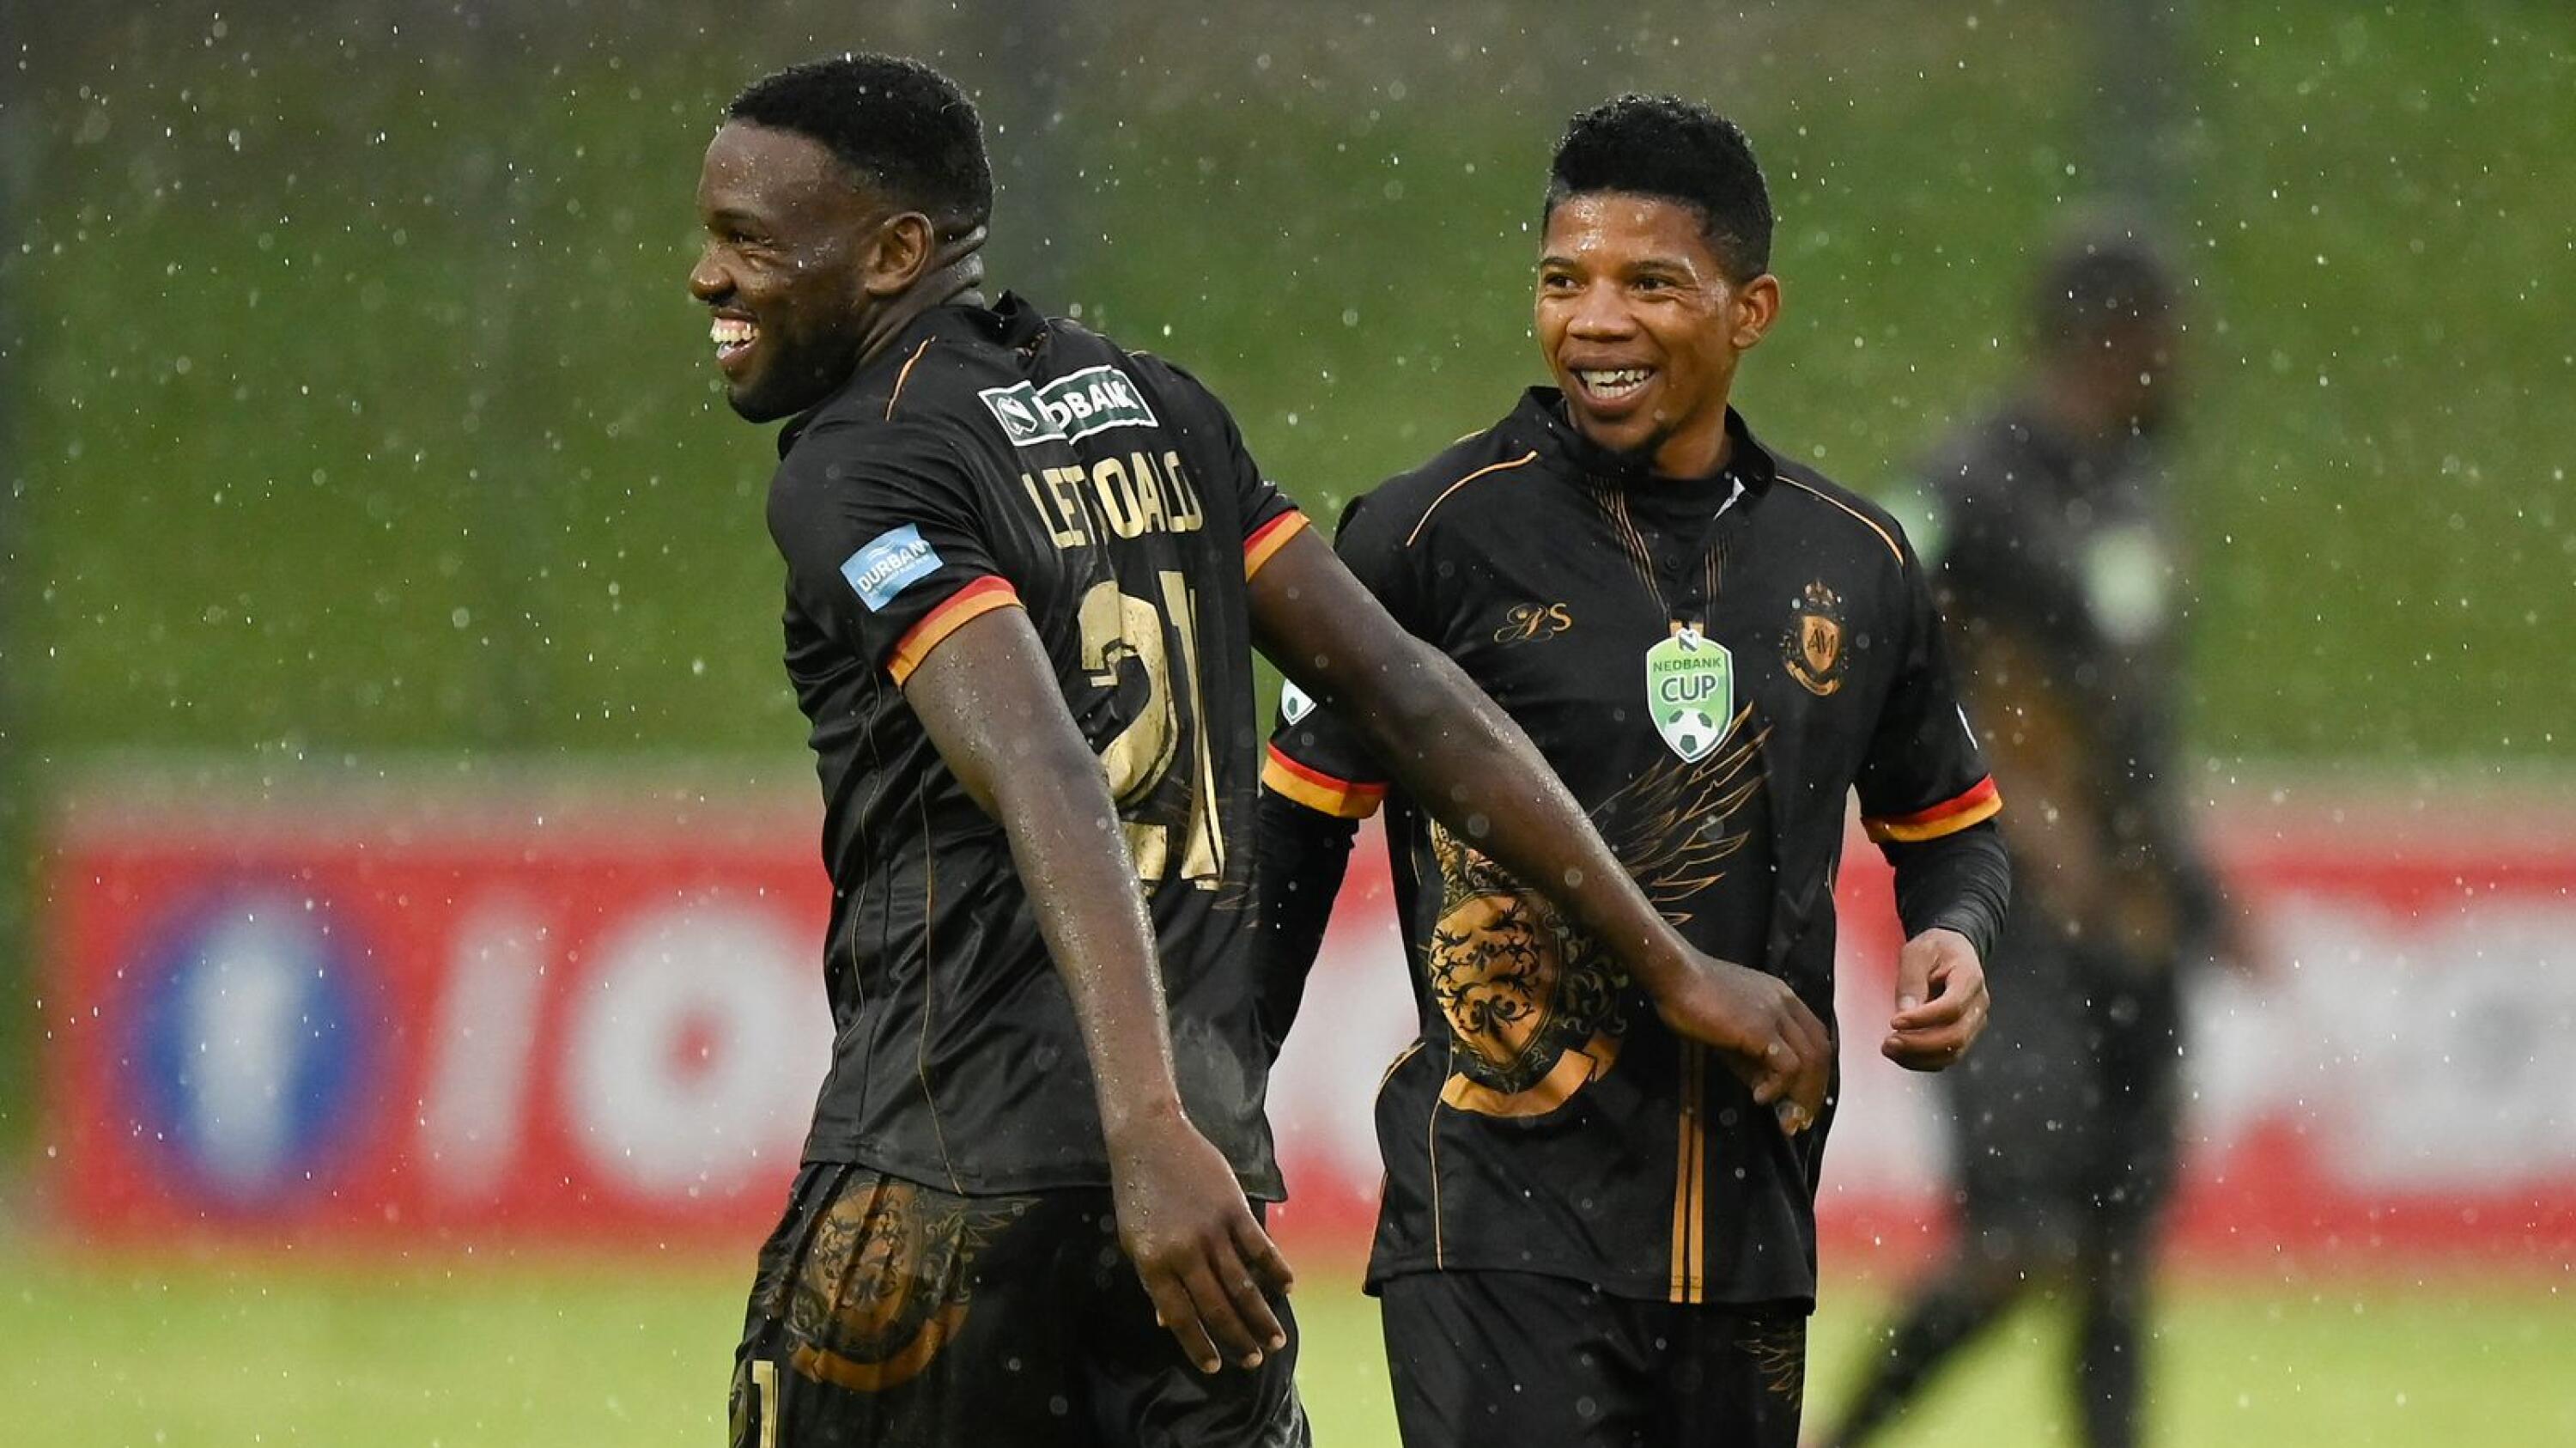 Royal AM’s Victor Letsoale and Tebogo Potsane celebrate at the end of their Nedbank Cup quarter-final game against the University of Pretoria on Sunday